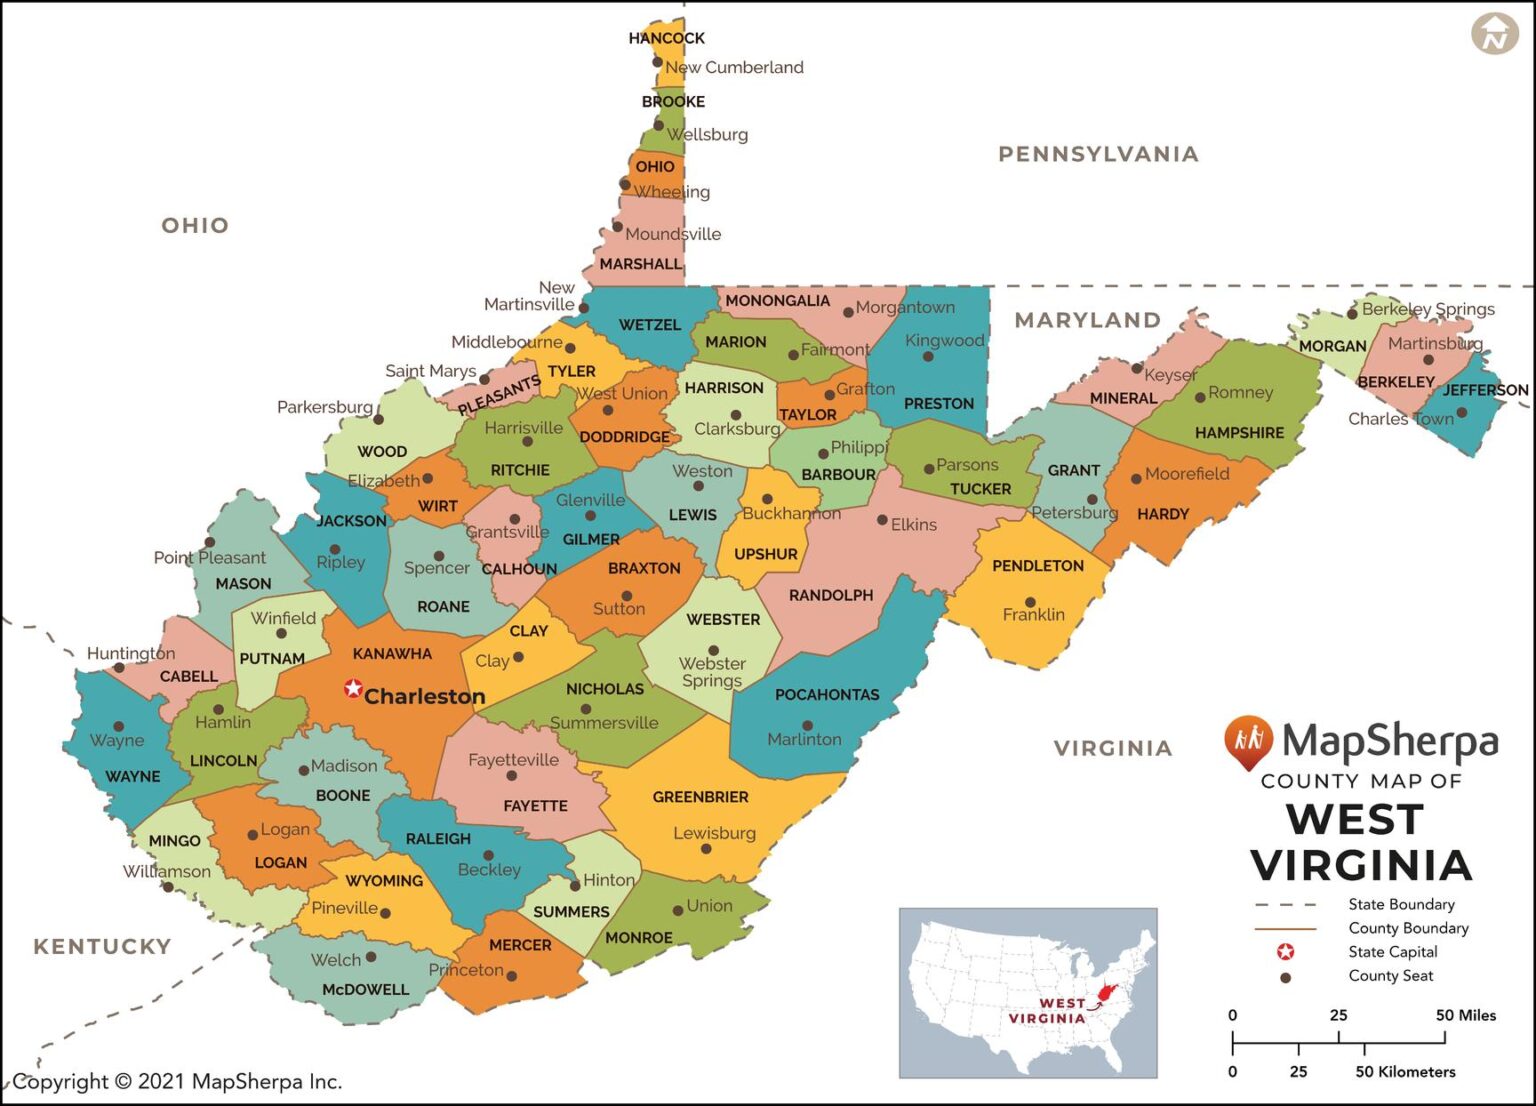 West Virginia Counties Map By Mapsherpa The Map Shop 8904